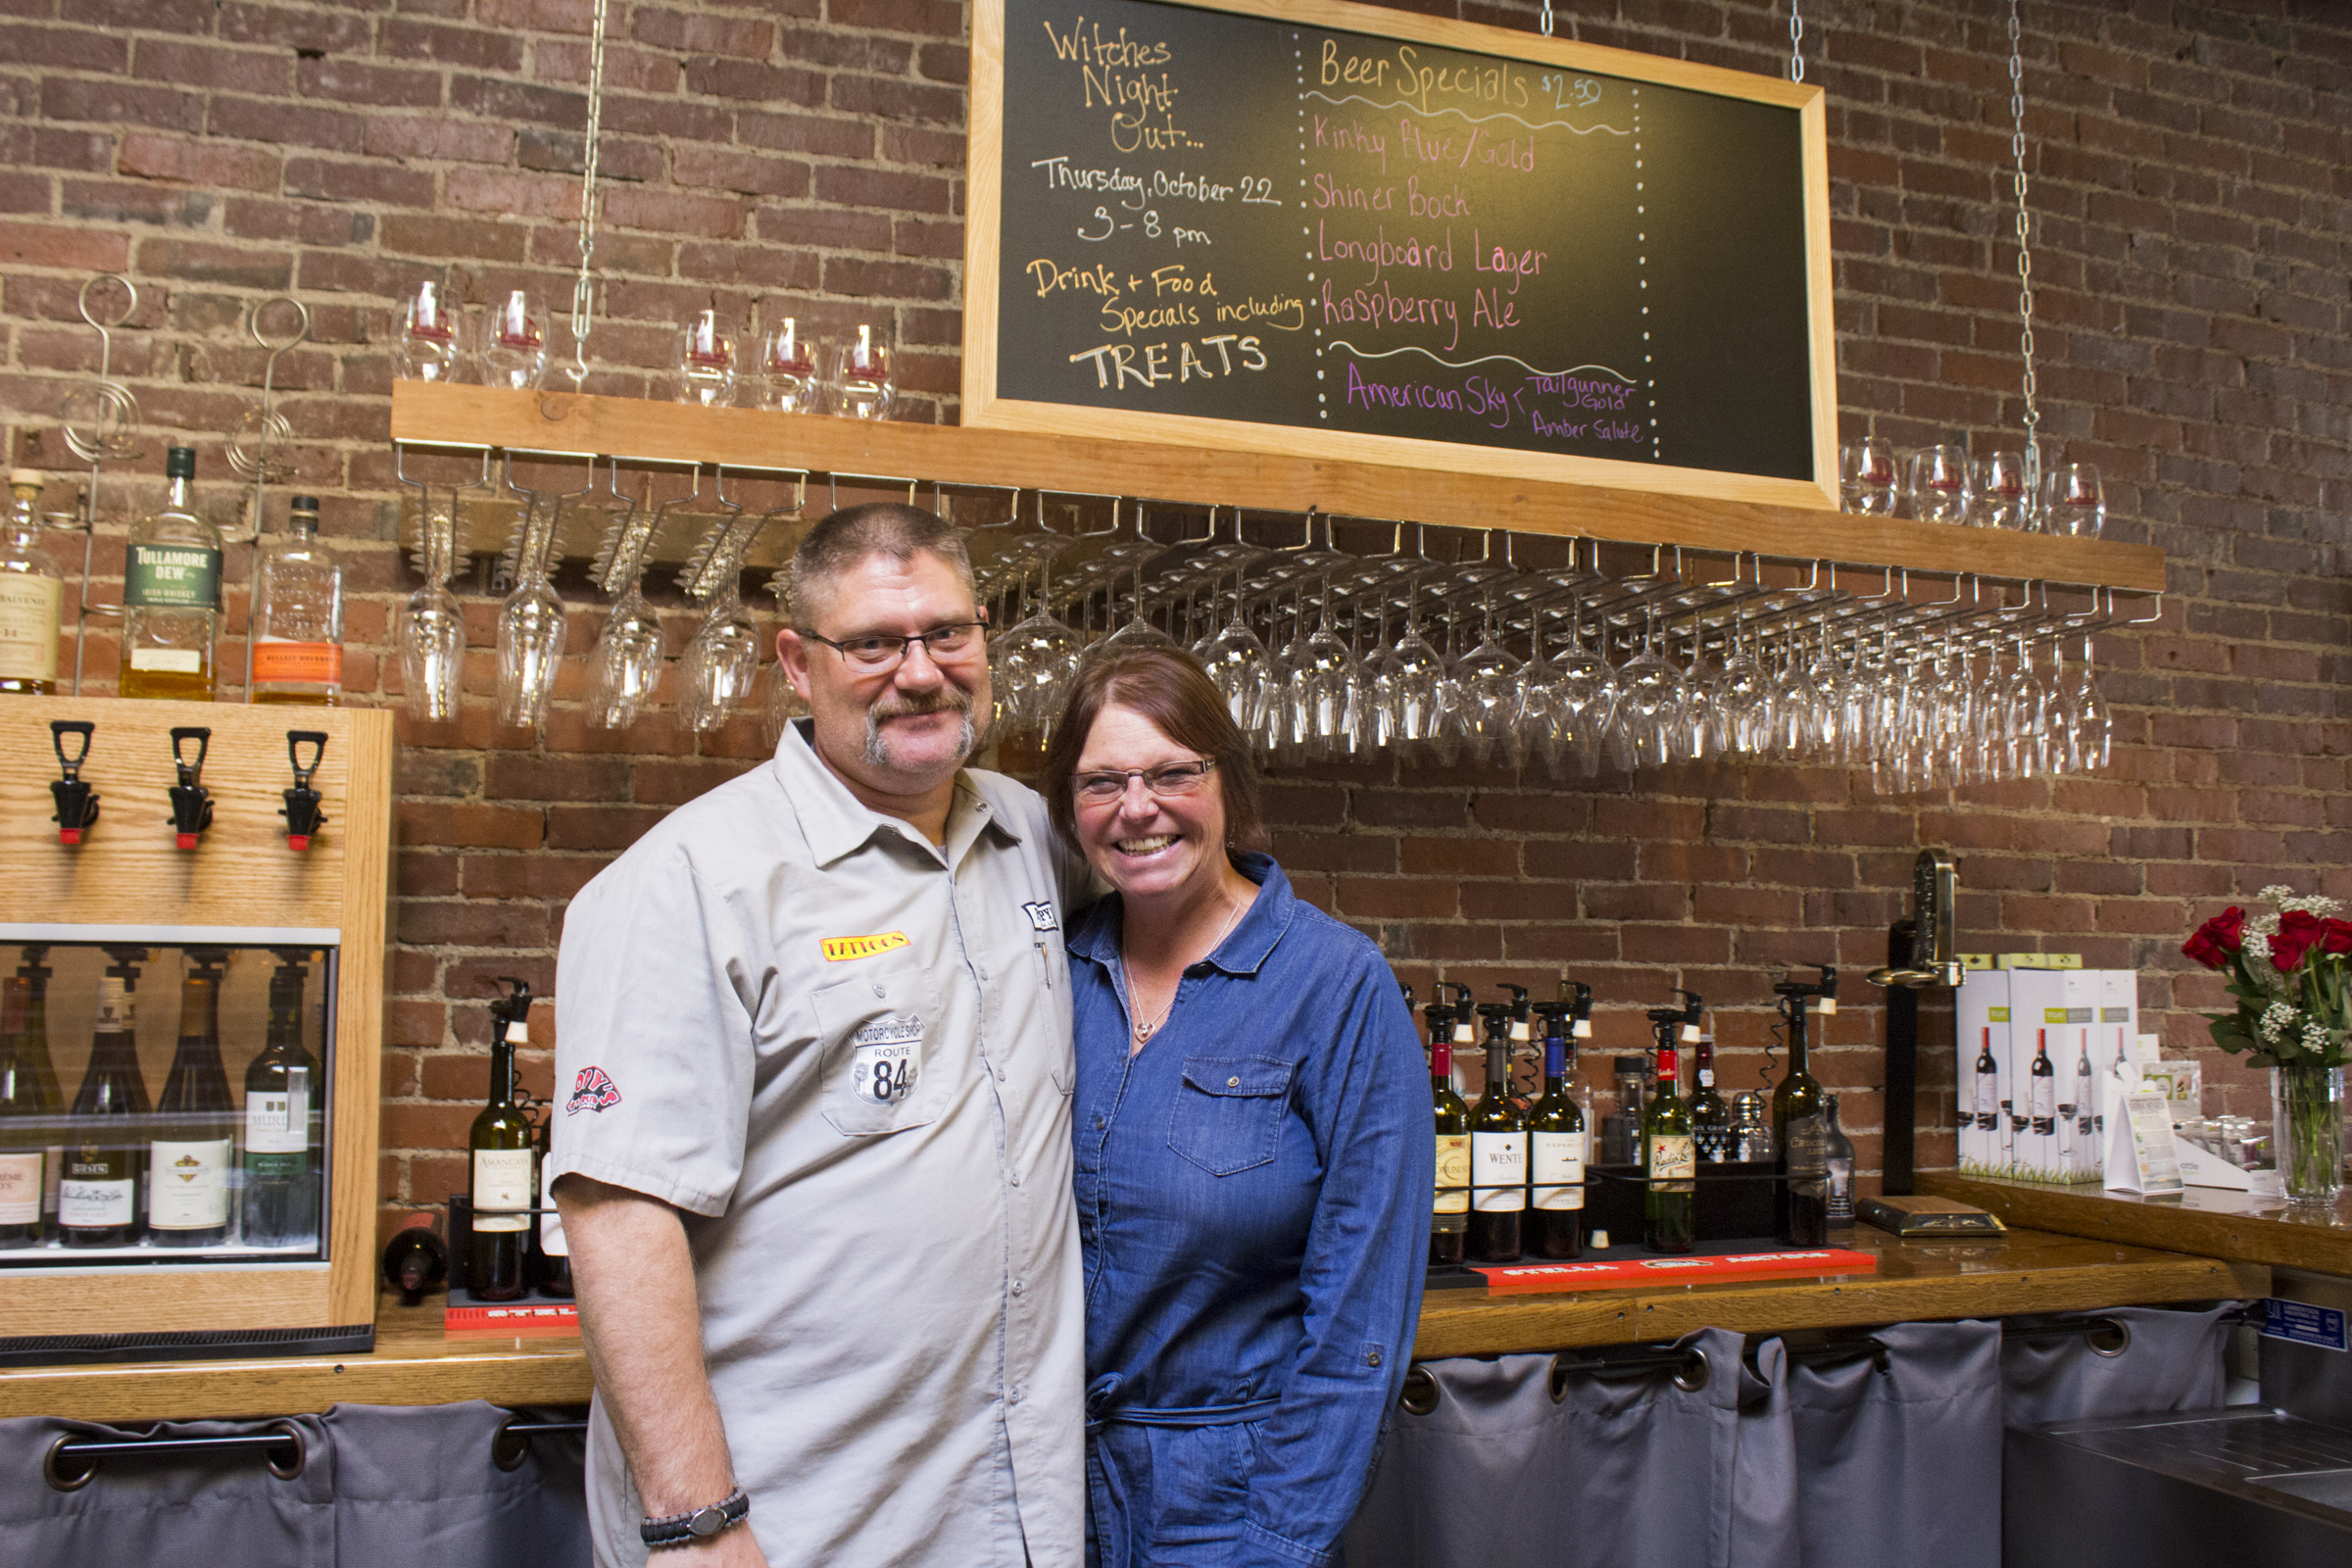 The Barrel Room owners: Rick and Mary Bygd